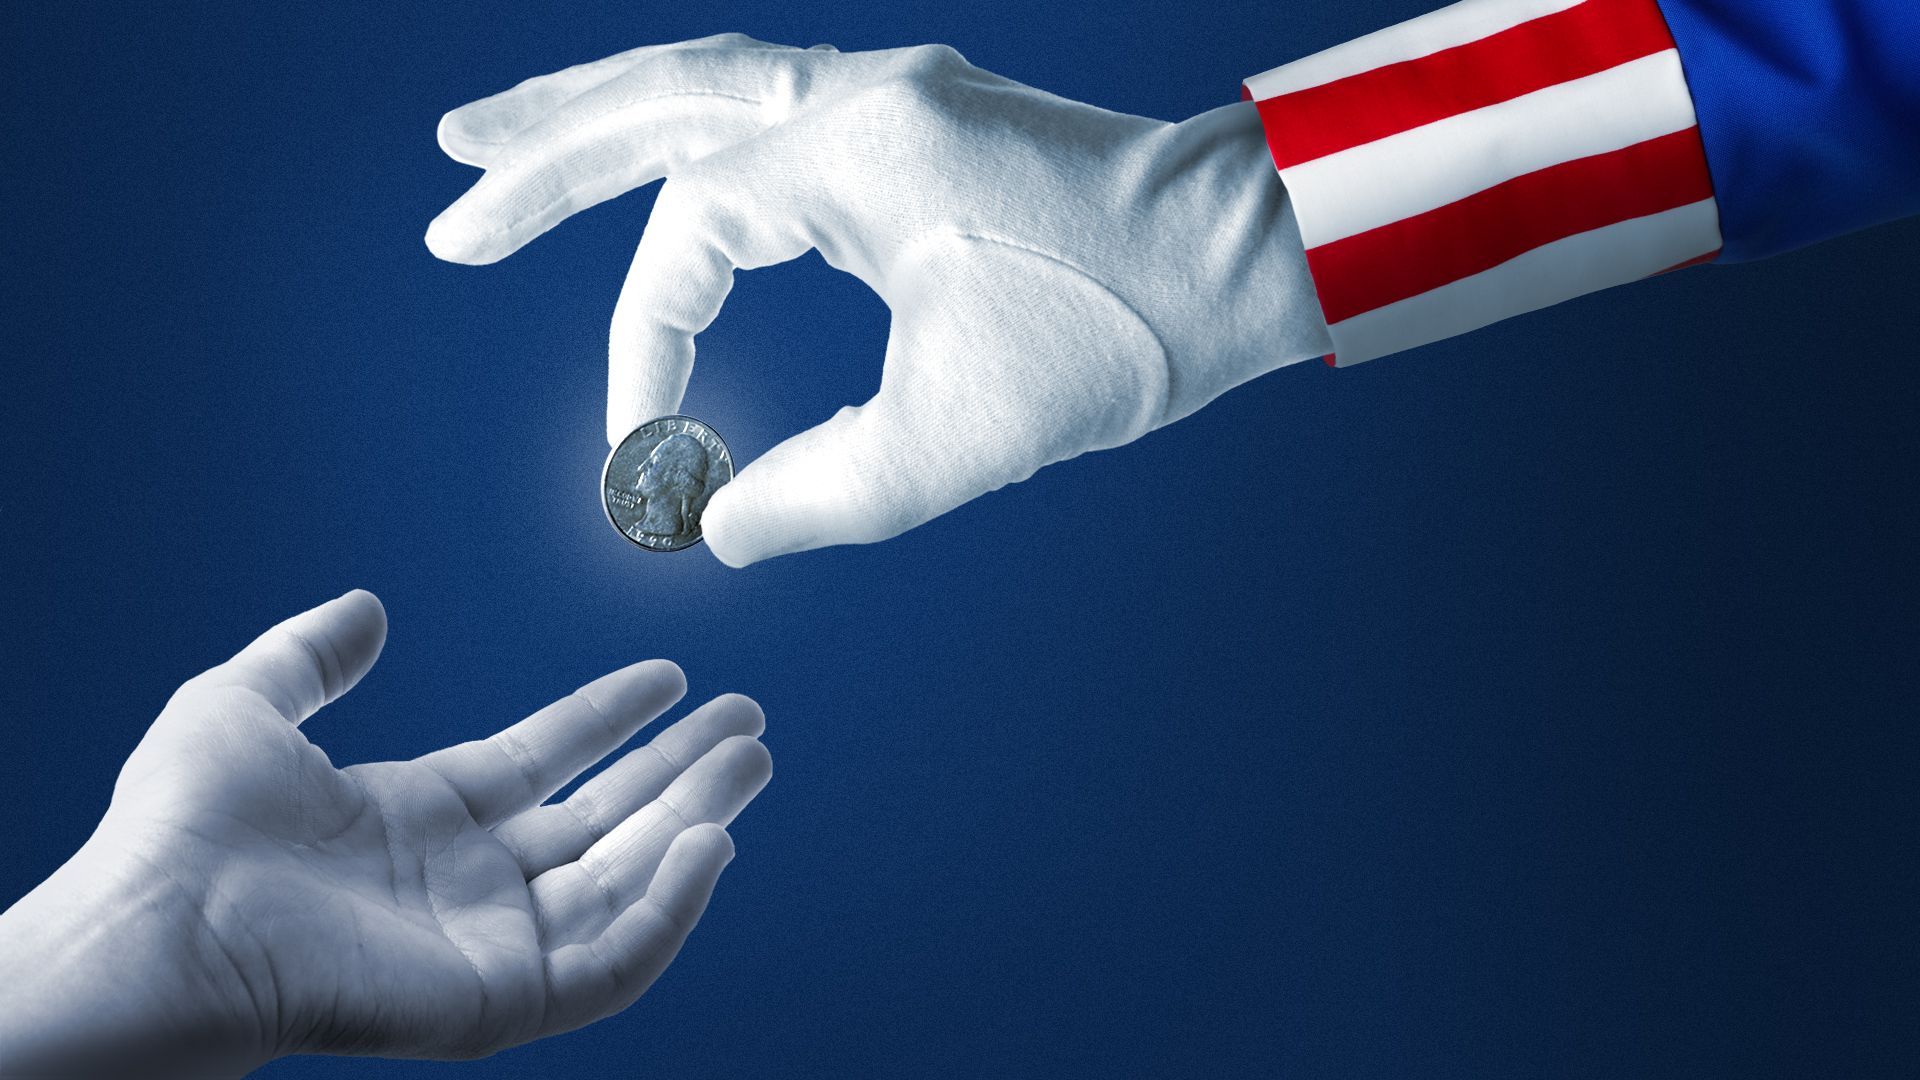 Illustration of Uncle Sam placing a quarter in a person's outstretched hand.